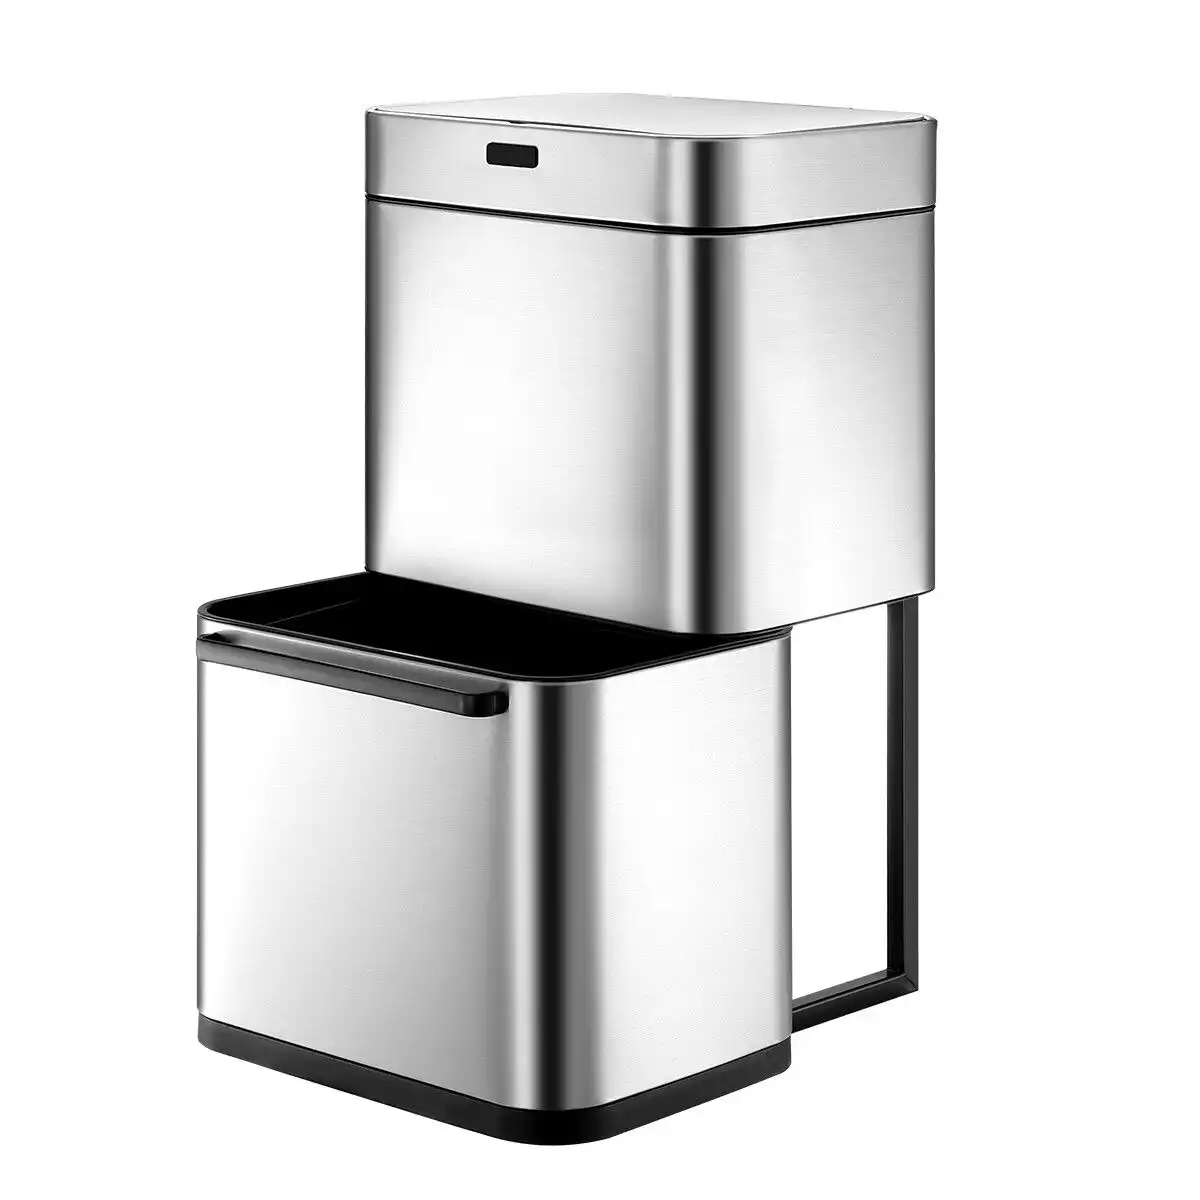 Ausway 80L Dual Rubbish Bin Sensor Recycling Kitchen Waste Trash Garbage Can Stainless Steel Silver